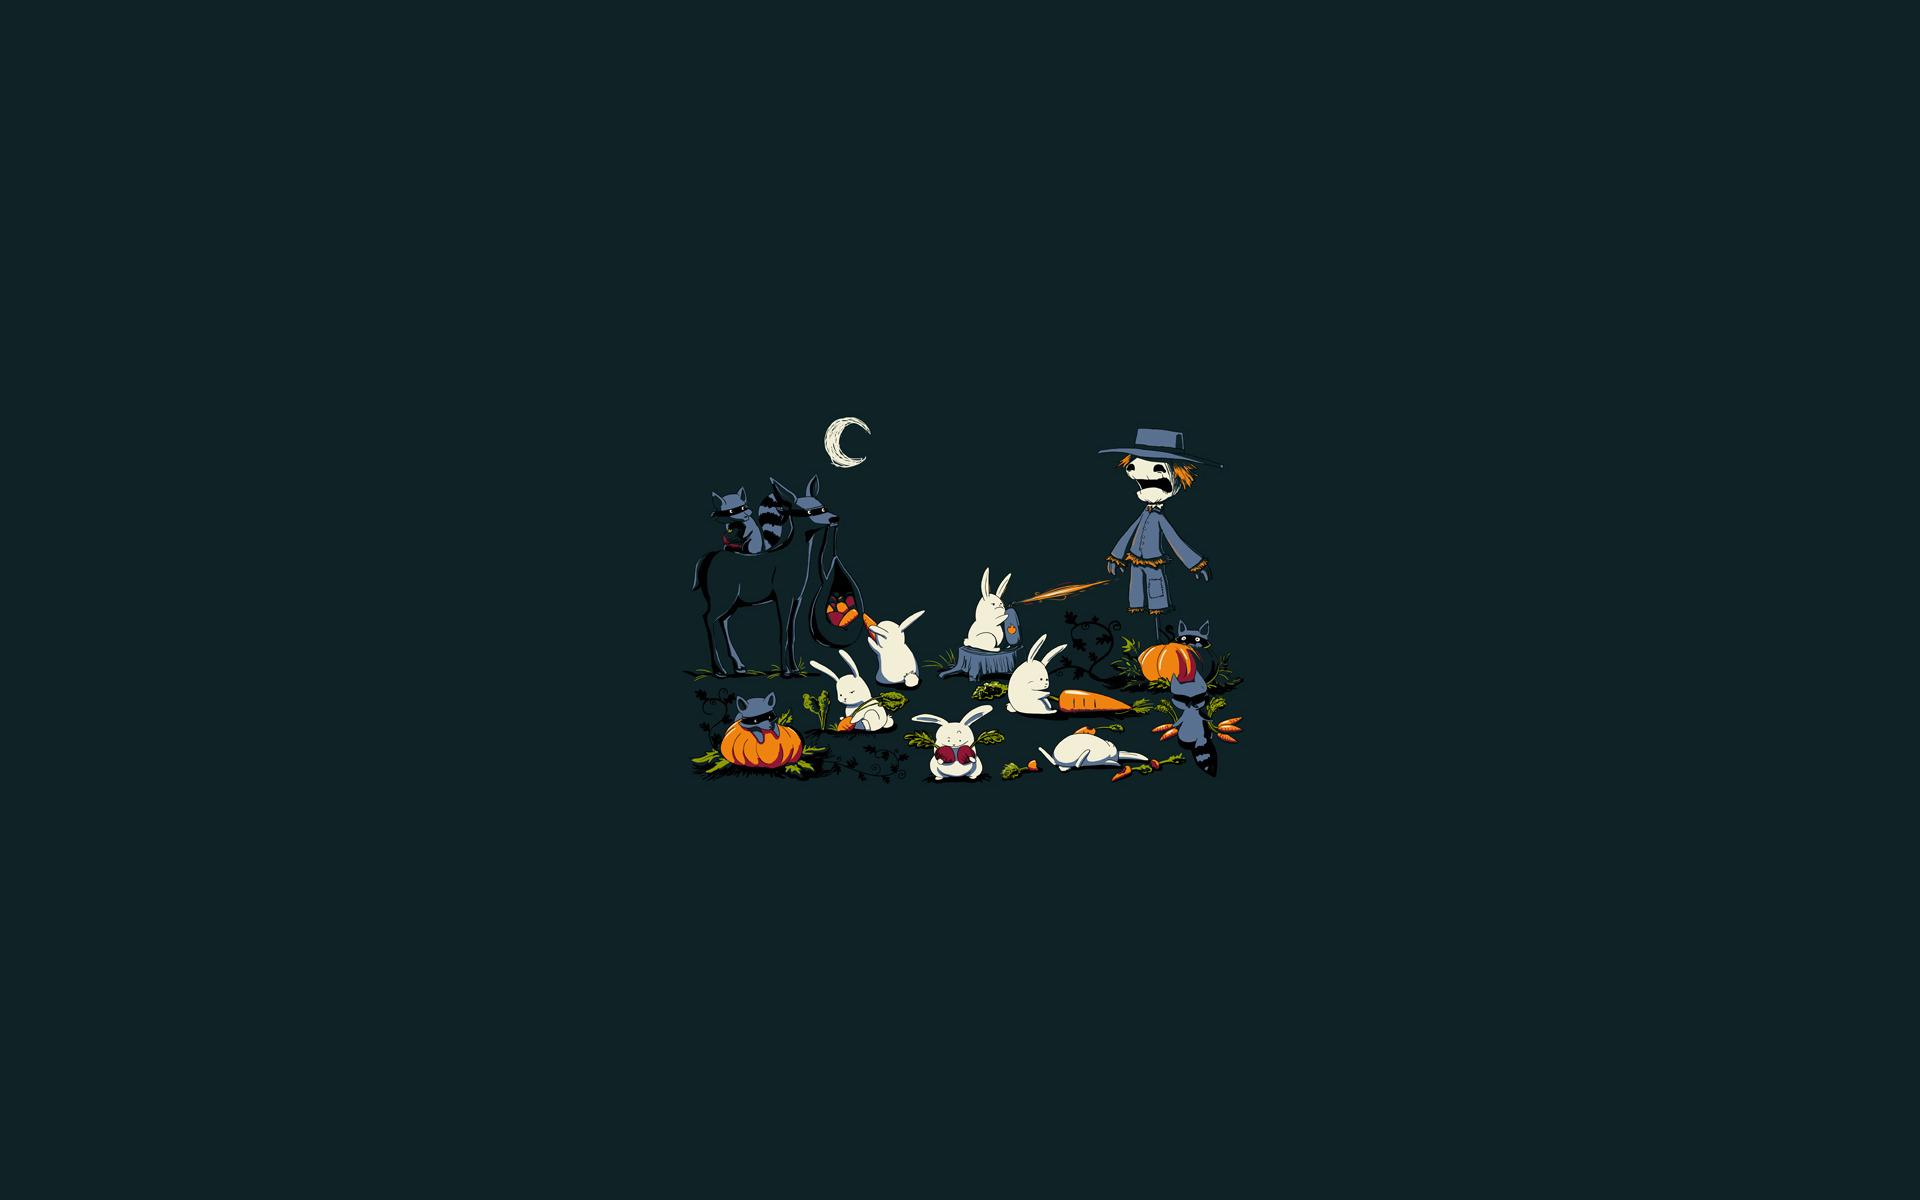 simple minimalism carrots rabbits scarecrows night